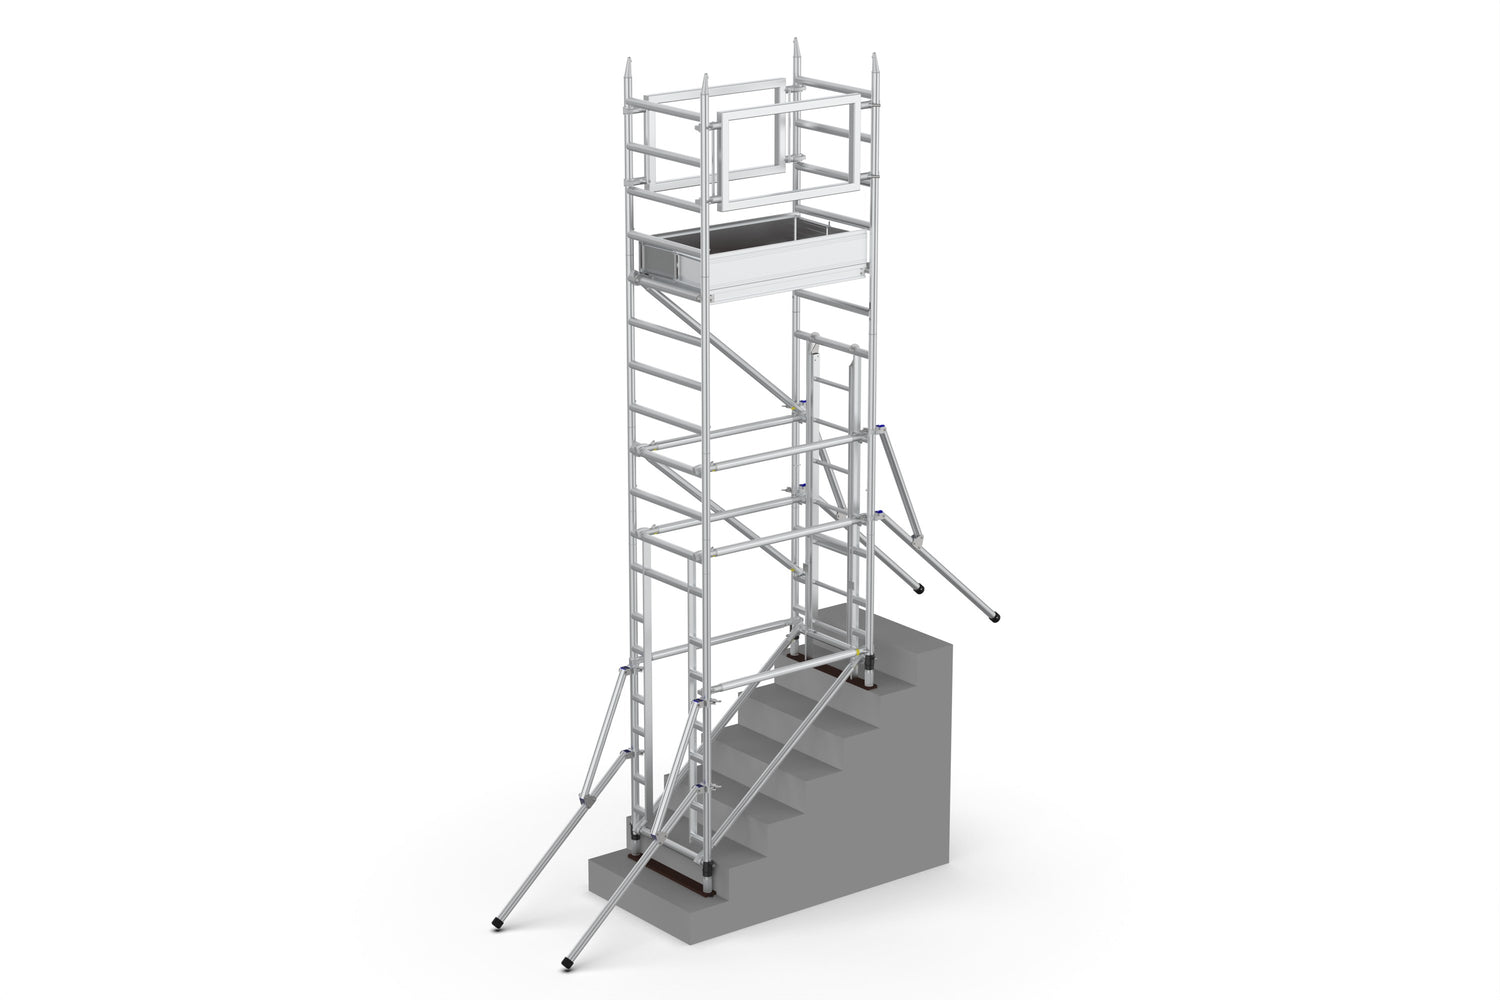 A render of the Alto Stairwell Pro Tower on a staircase